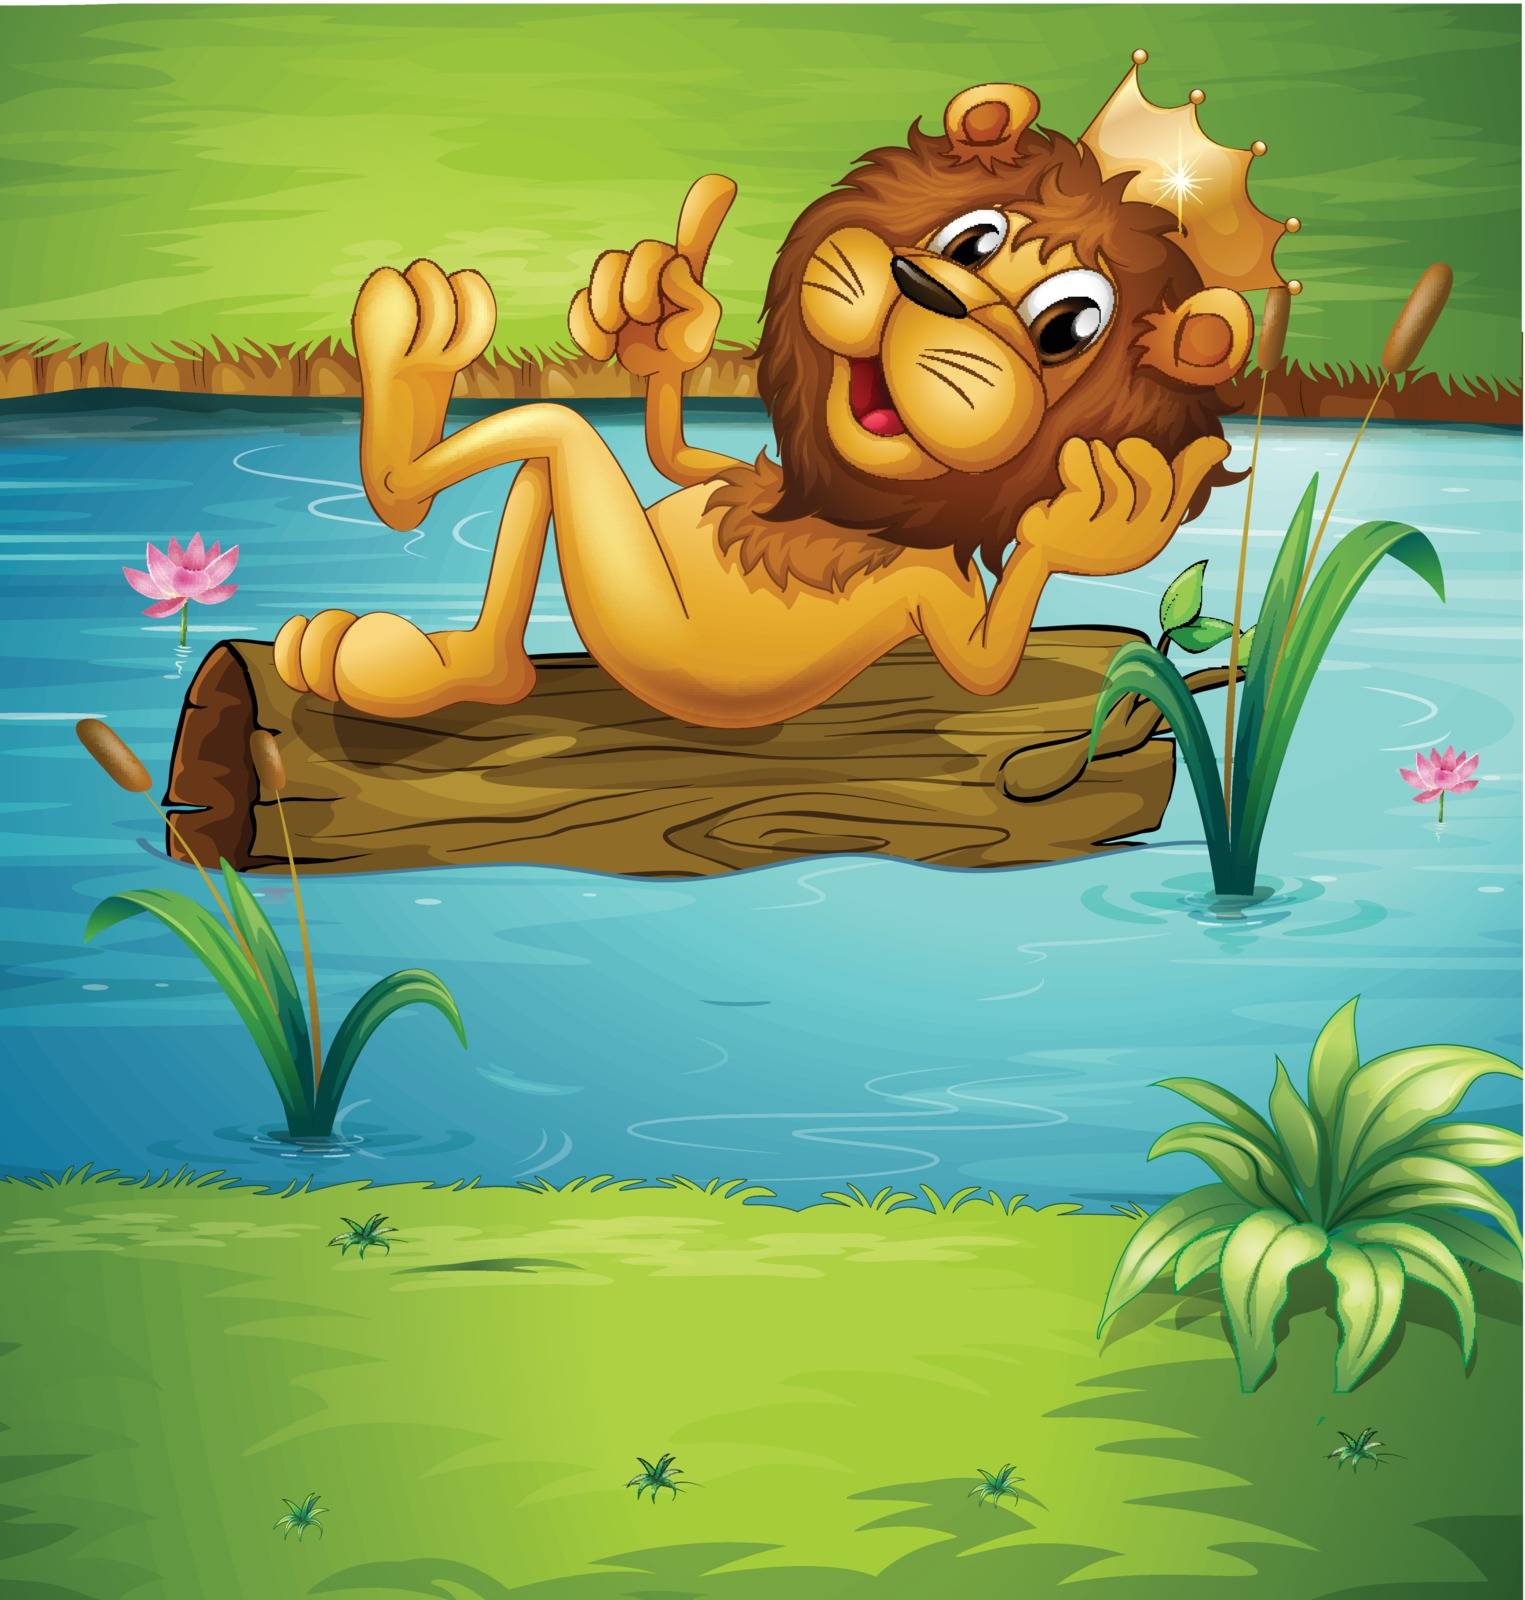 Illustration of a smiling lion on a dry wood in a river